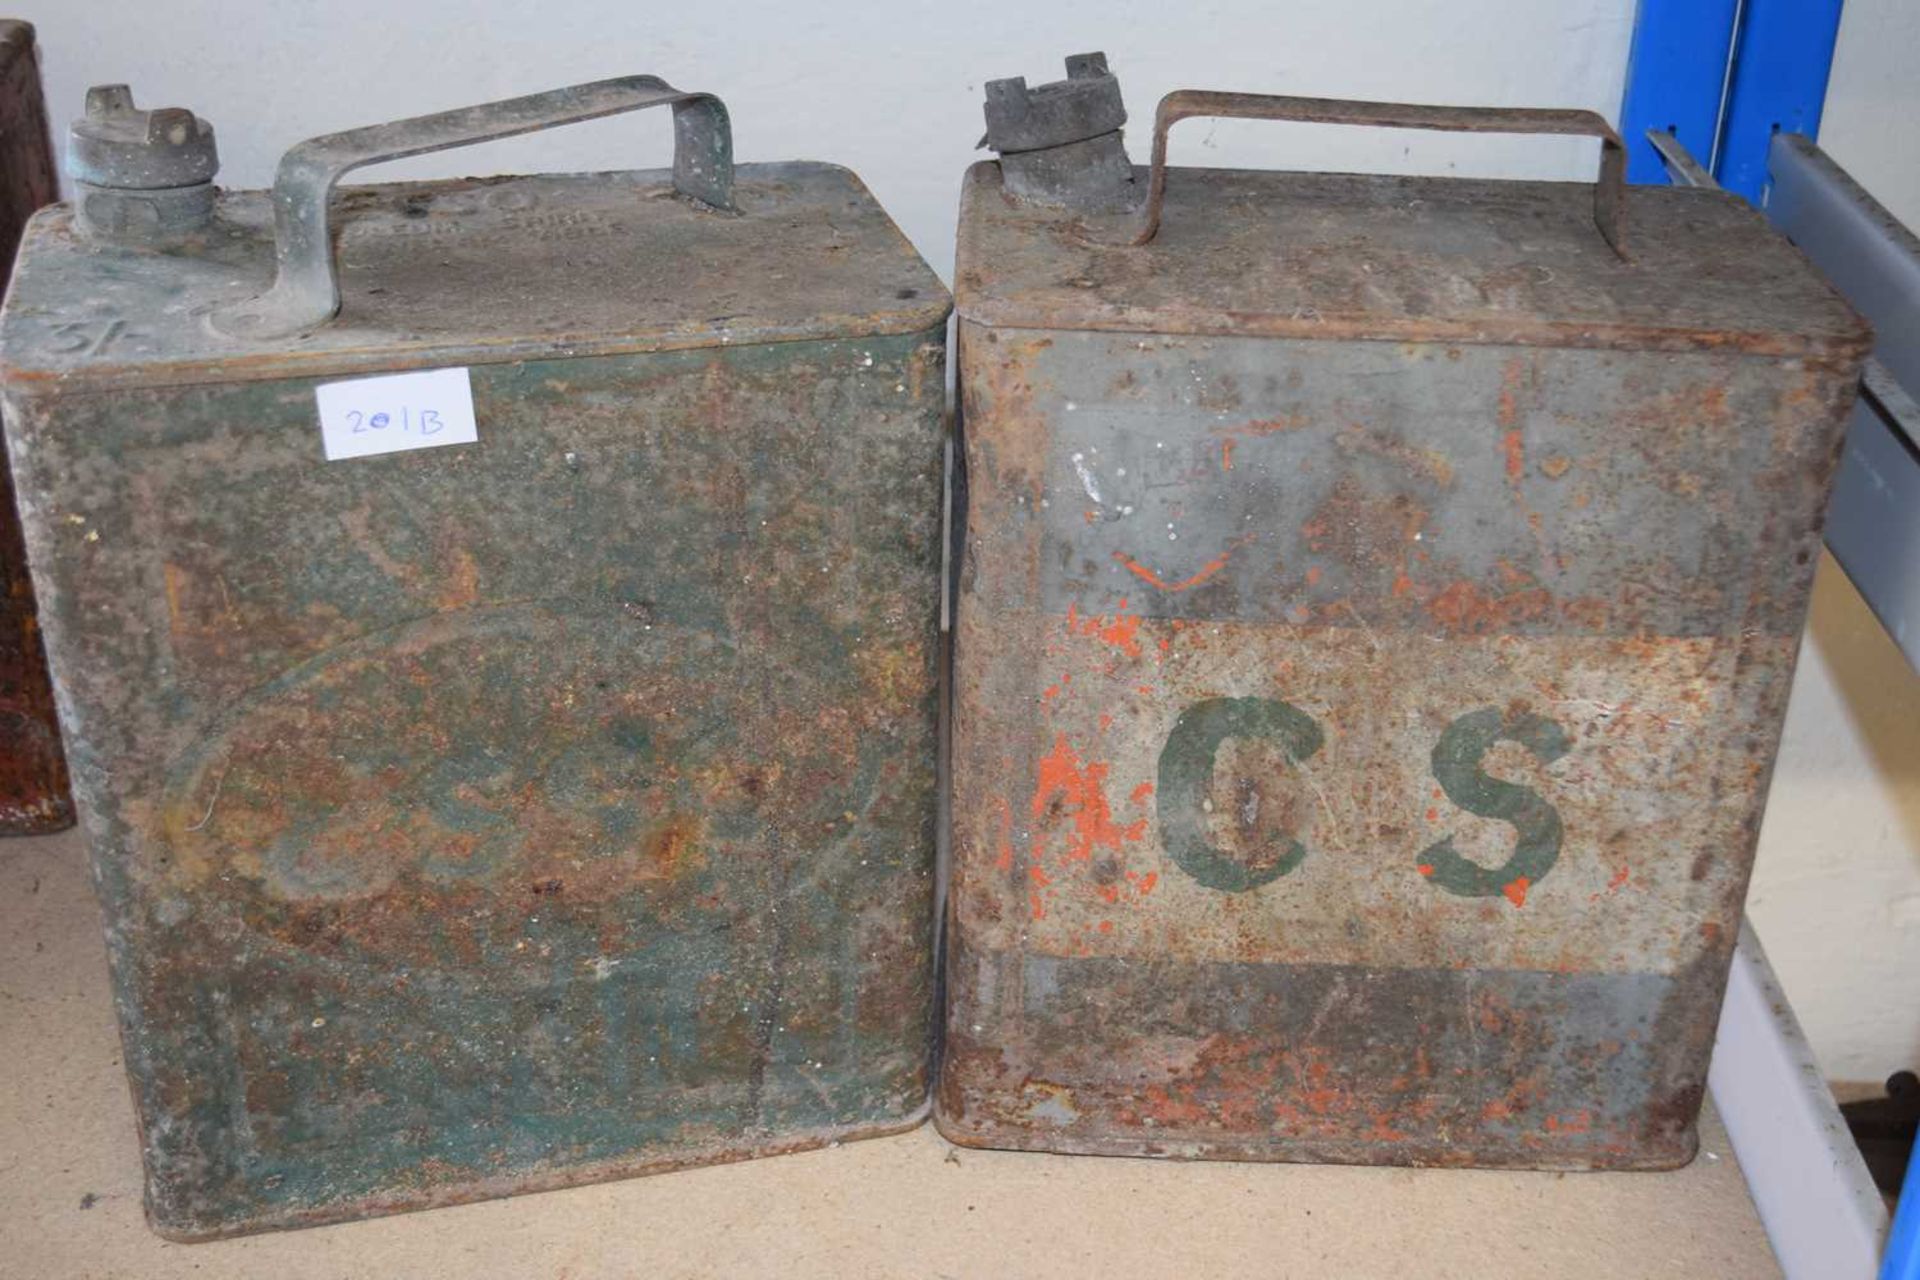 2 vintage oil cans Esso and c.s.